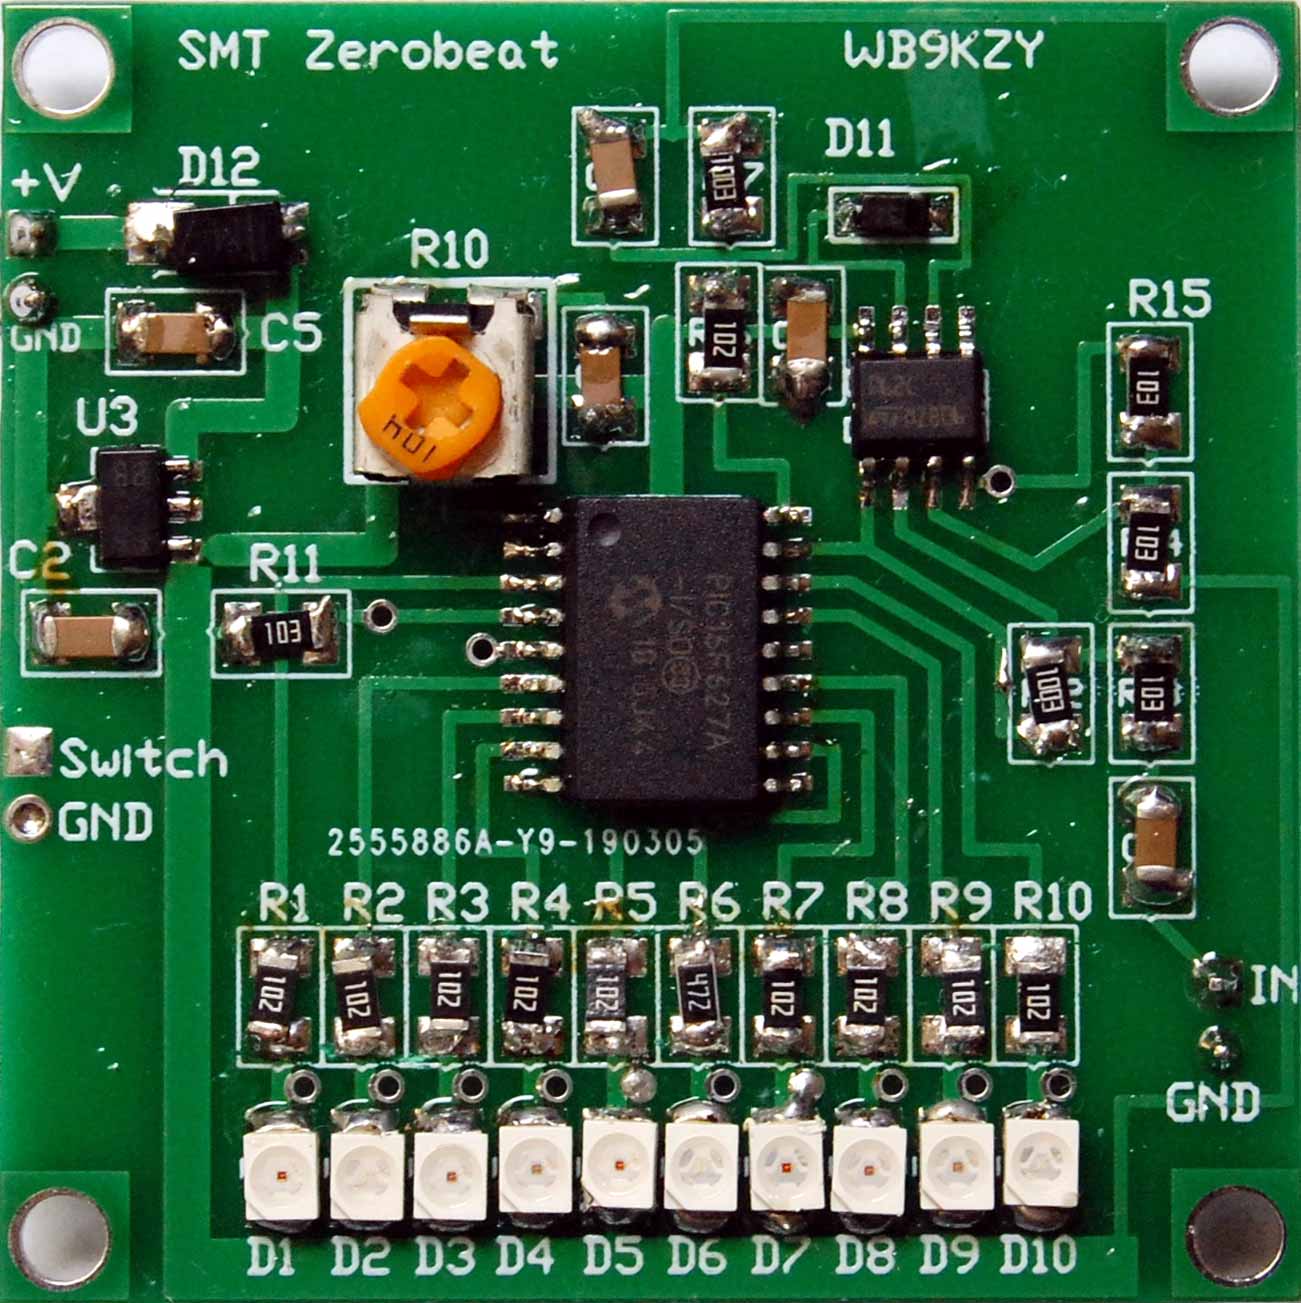 [SMT Zerobeat circuit board picture - click for larger version]